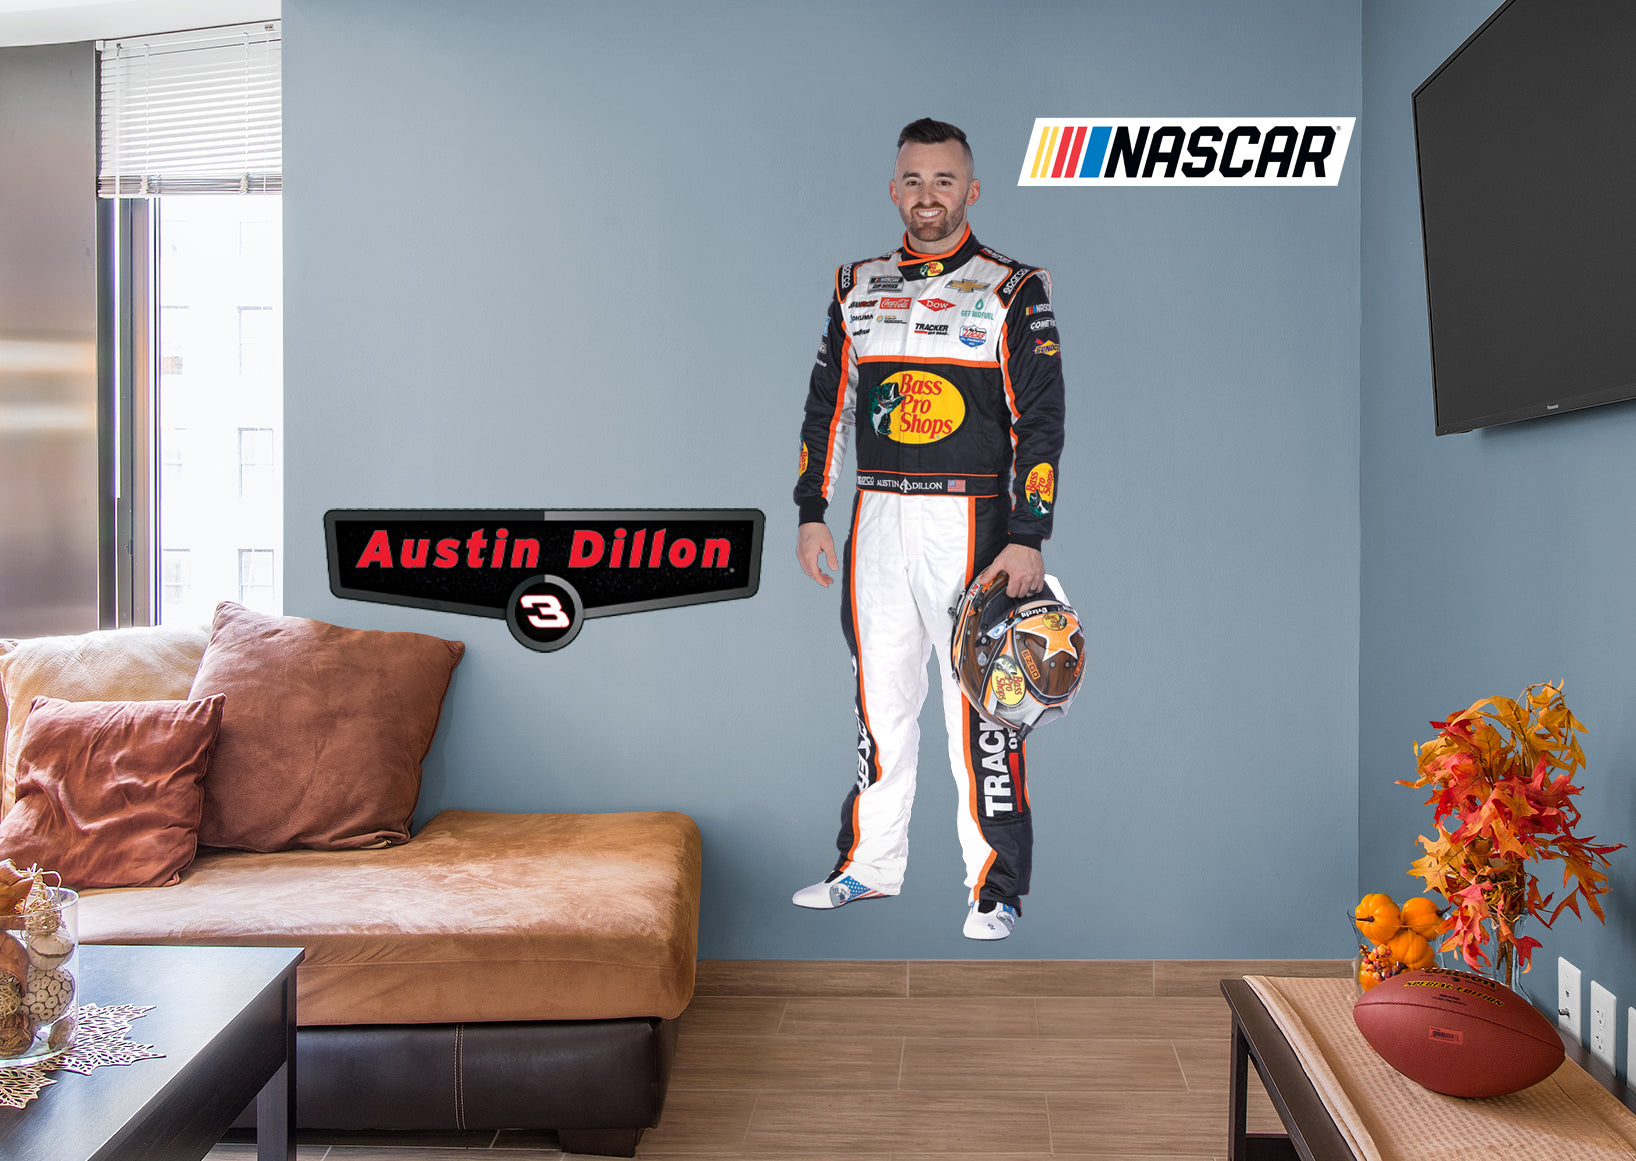 Austin Dillon 2021 Driver - Officially Licensed NASCAR Removable Wall Decal Life-Size Character + 2 Decals (28"W x 78"H) by Fath